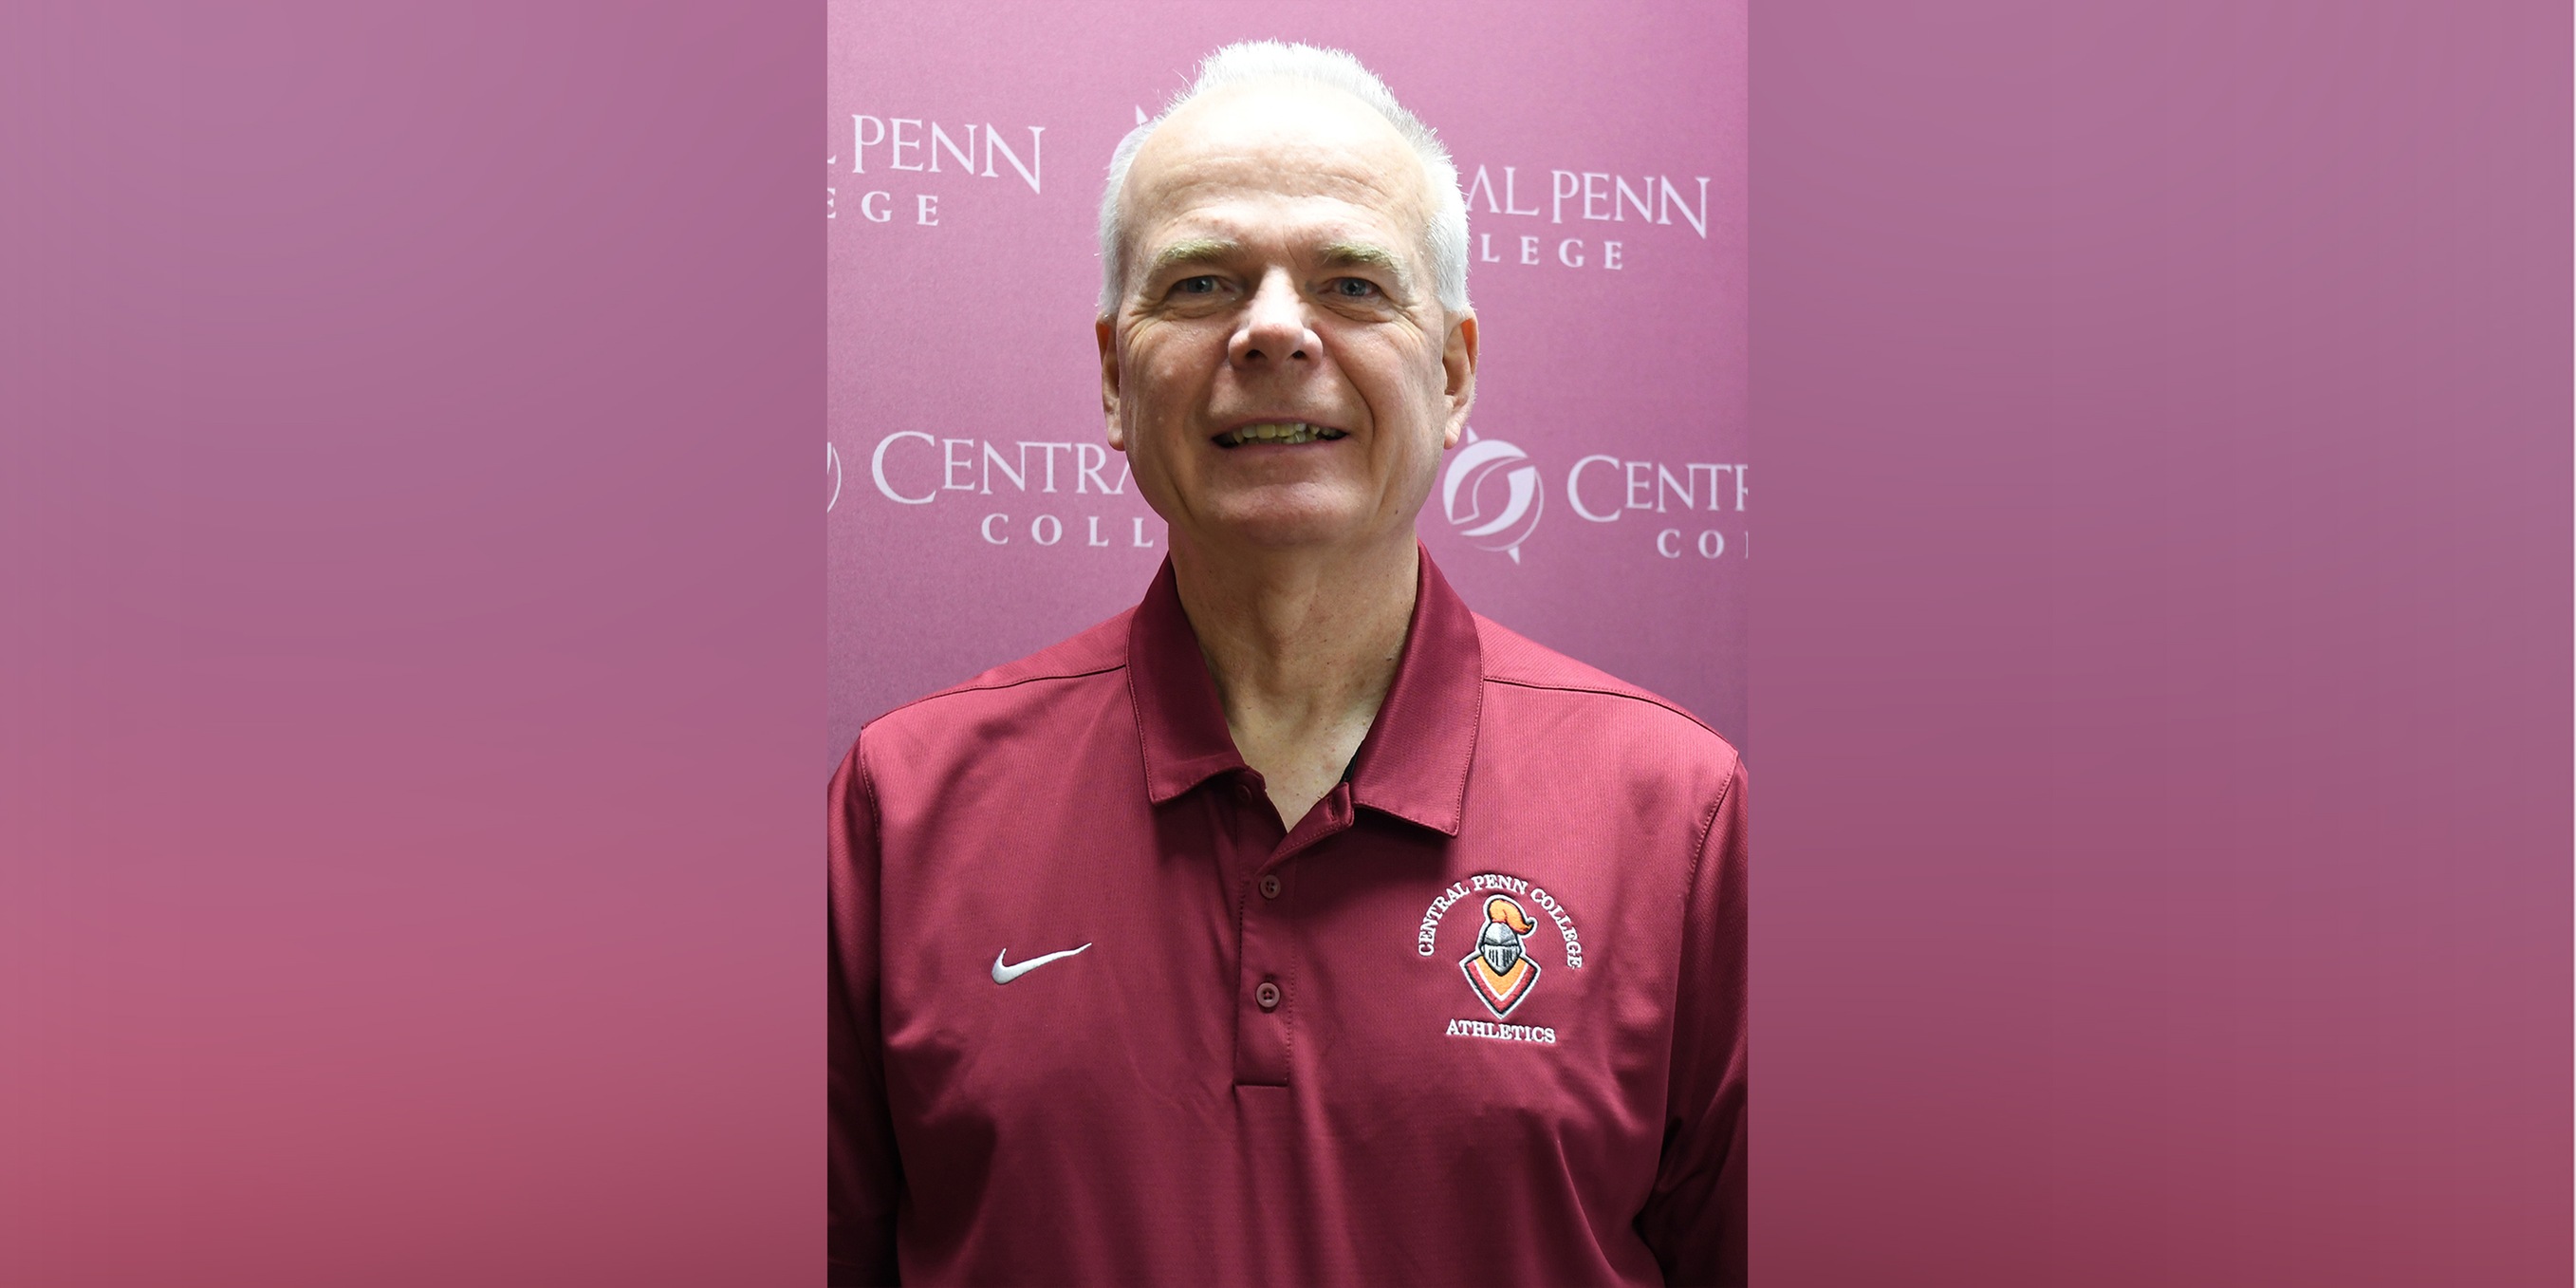 Central Penn College Hires New Women’s Soccer Coach